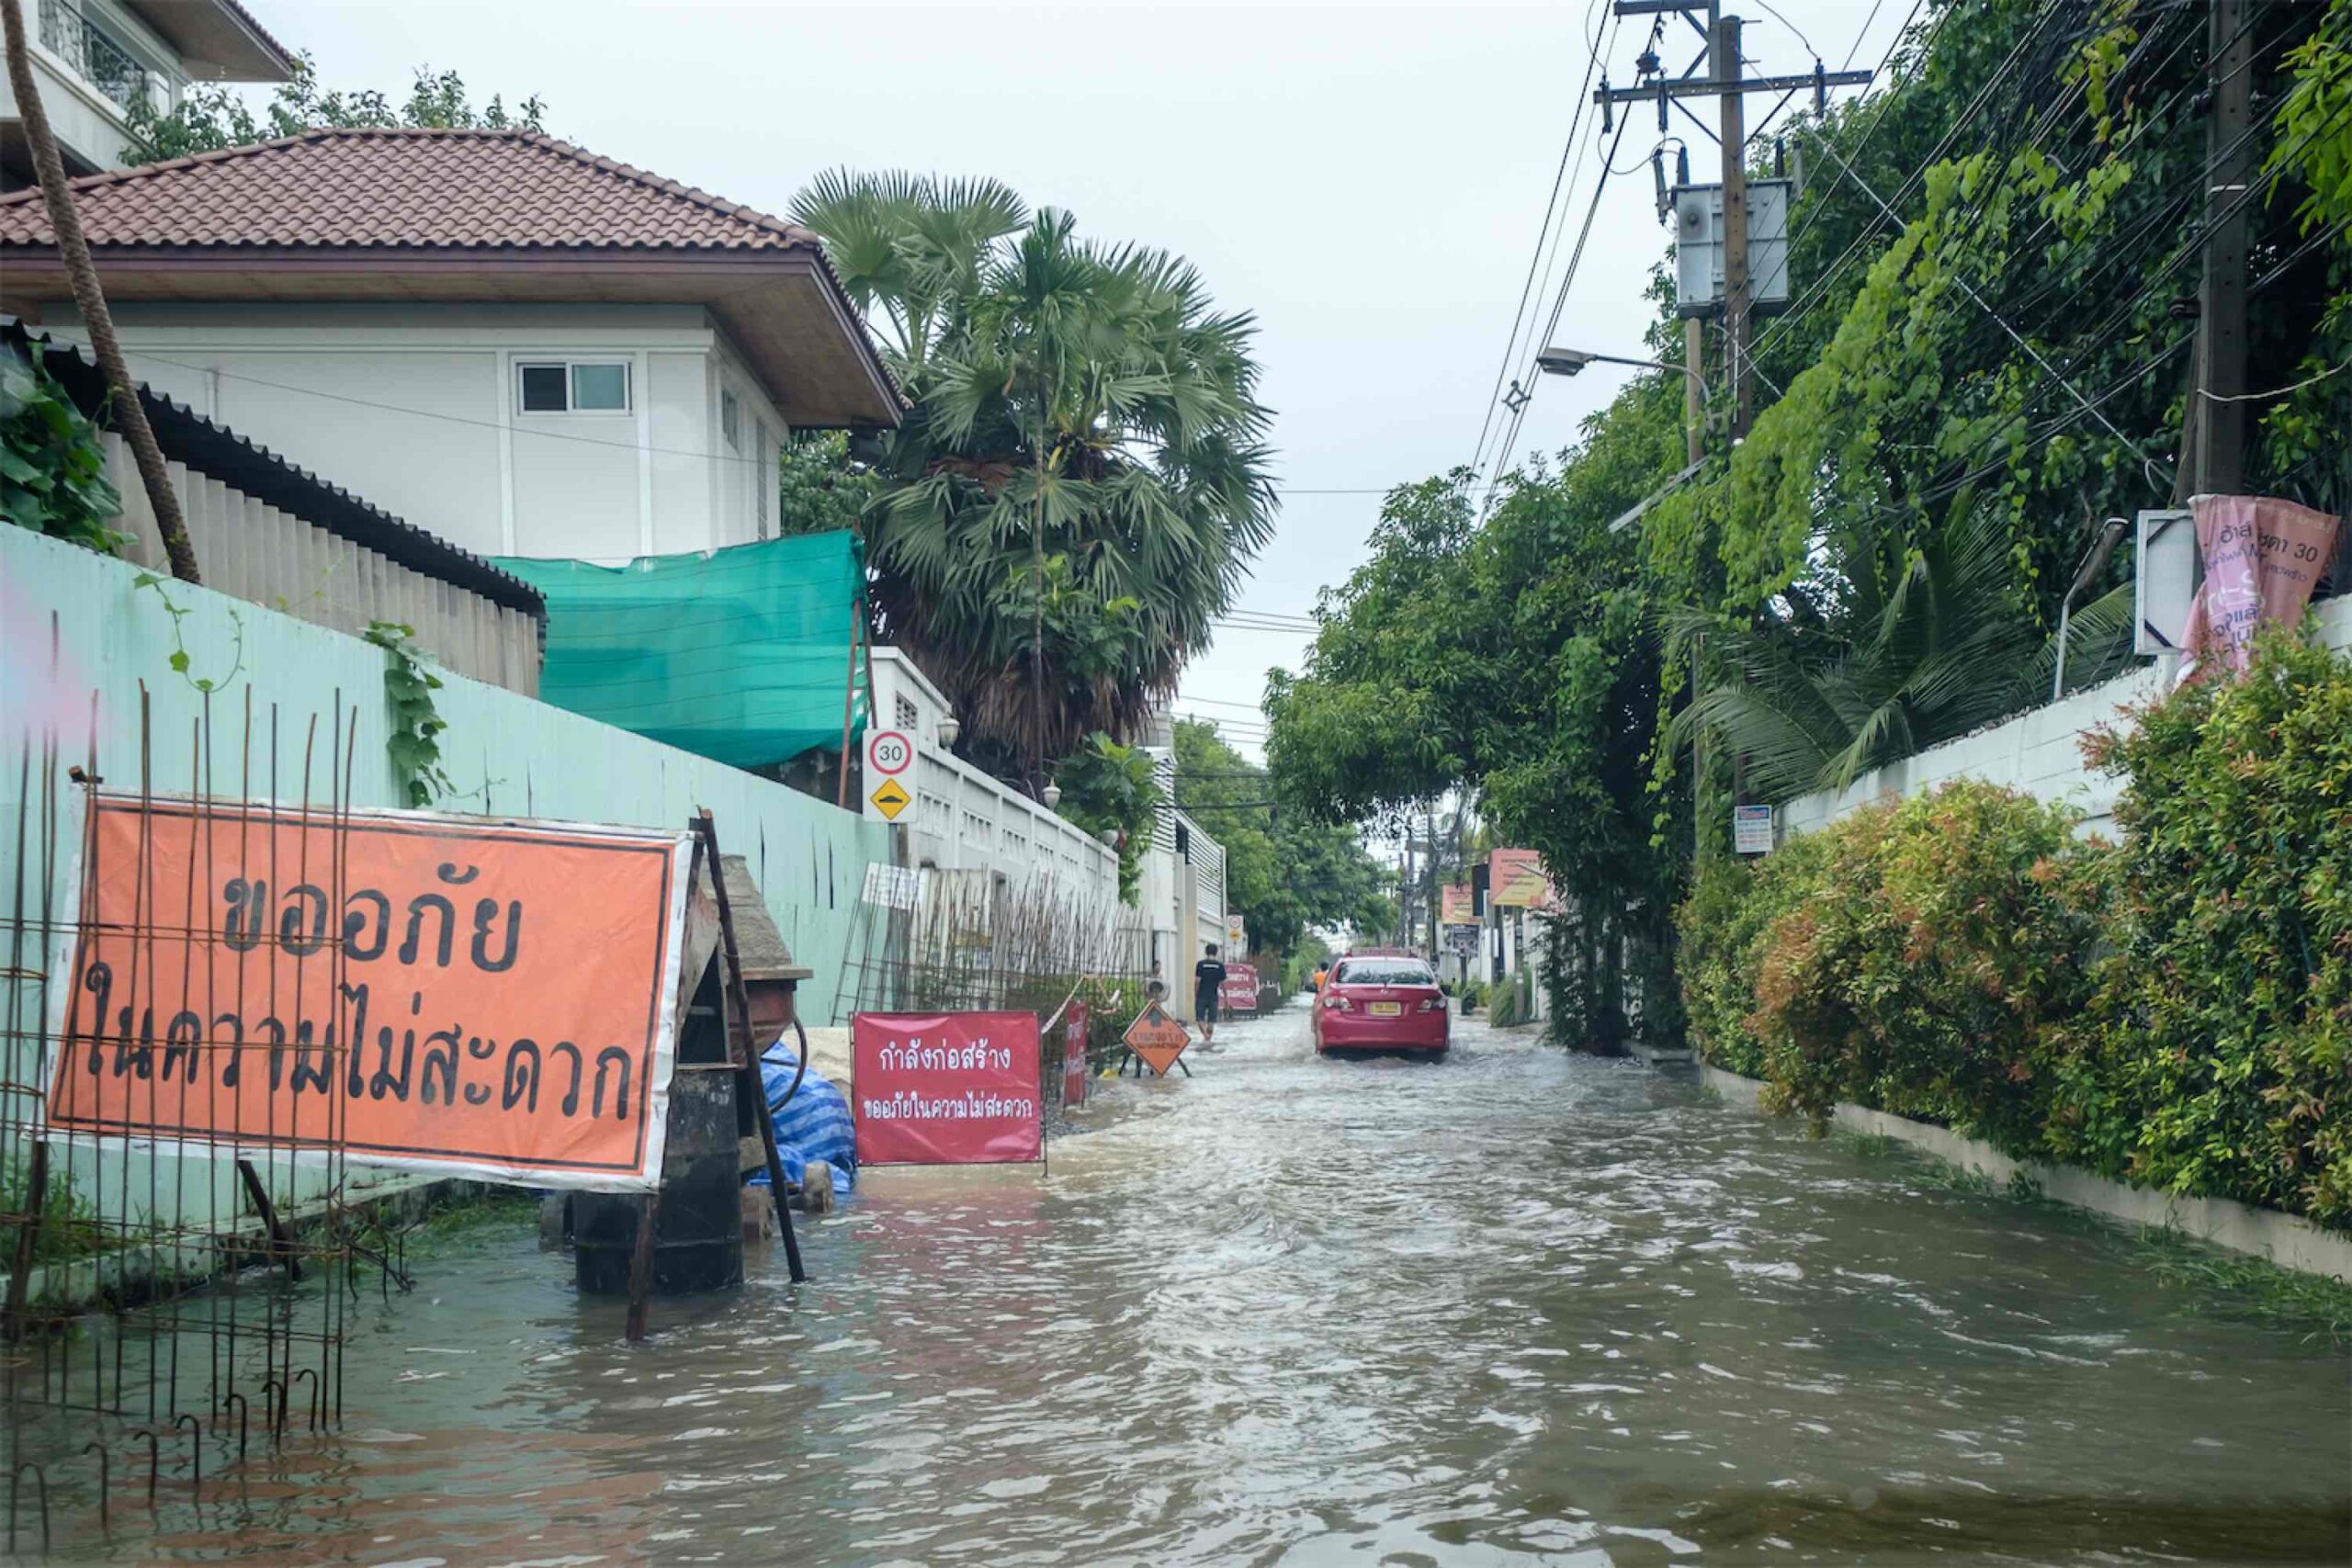 The nerve centre to combat flooding in Bangkok